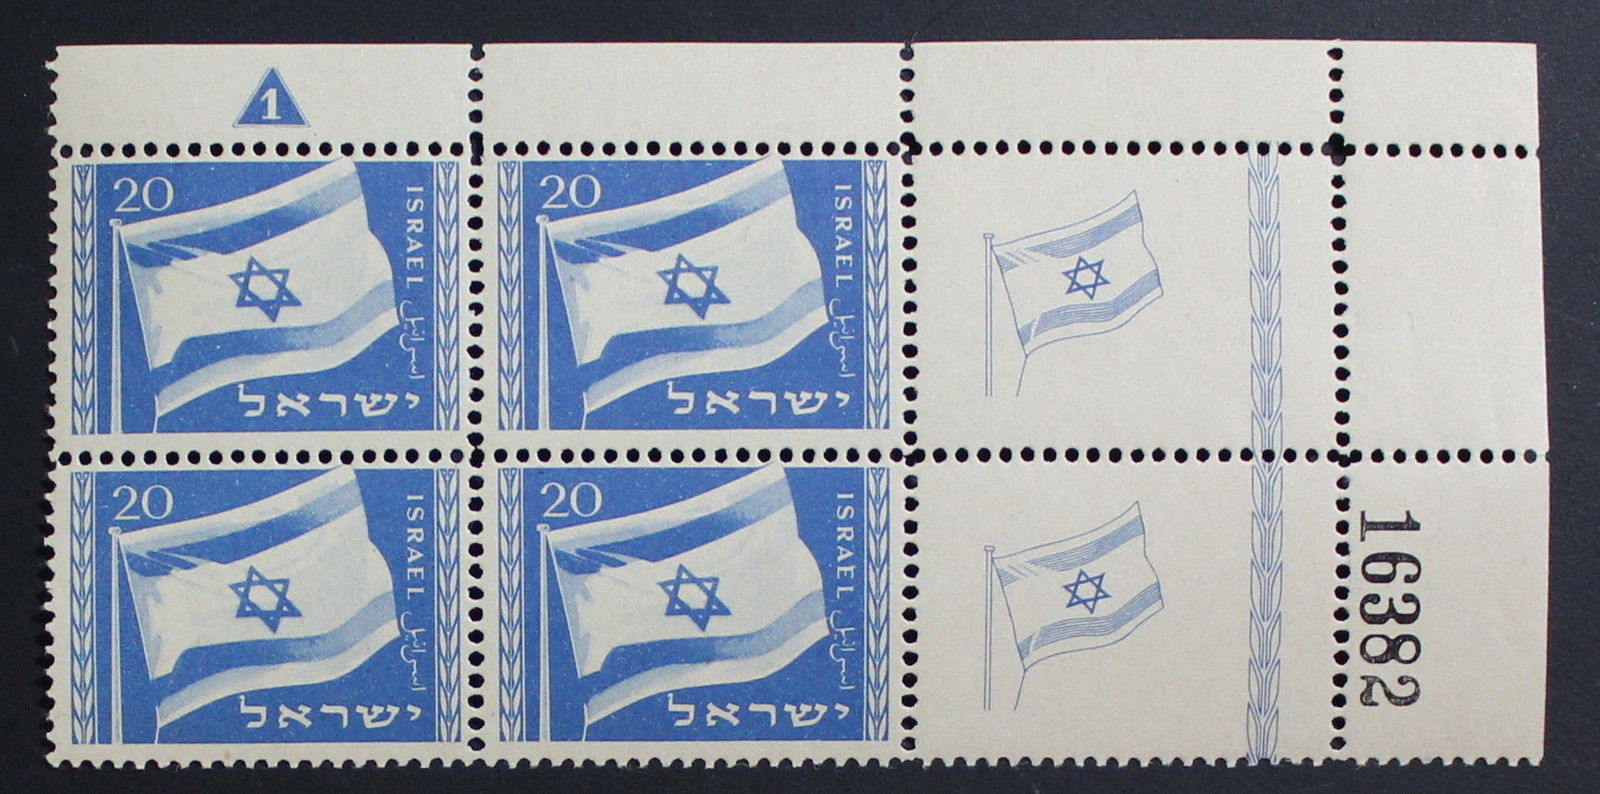 Israel 1949, Flag, MNH Tabed Plate Block of 4 Stamps, High CV #a1193